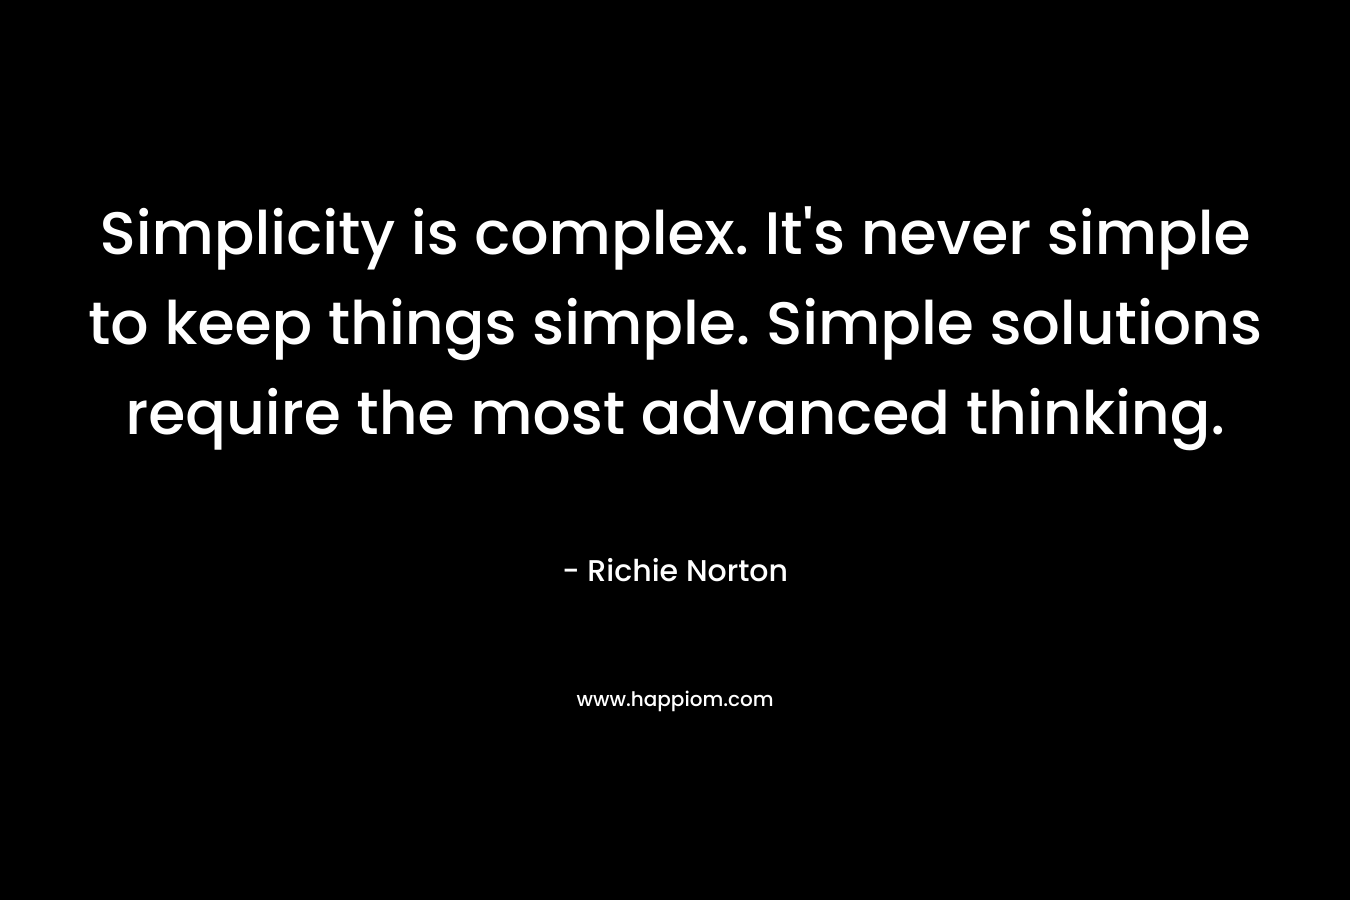 Simplicity is complex. It’s never simple to keep things simple. Simple solutions require the most advanced thinking. – Richie Norton